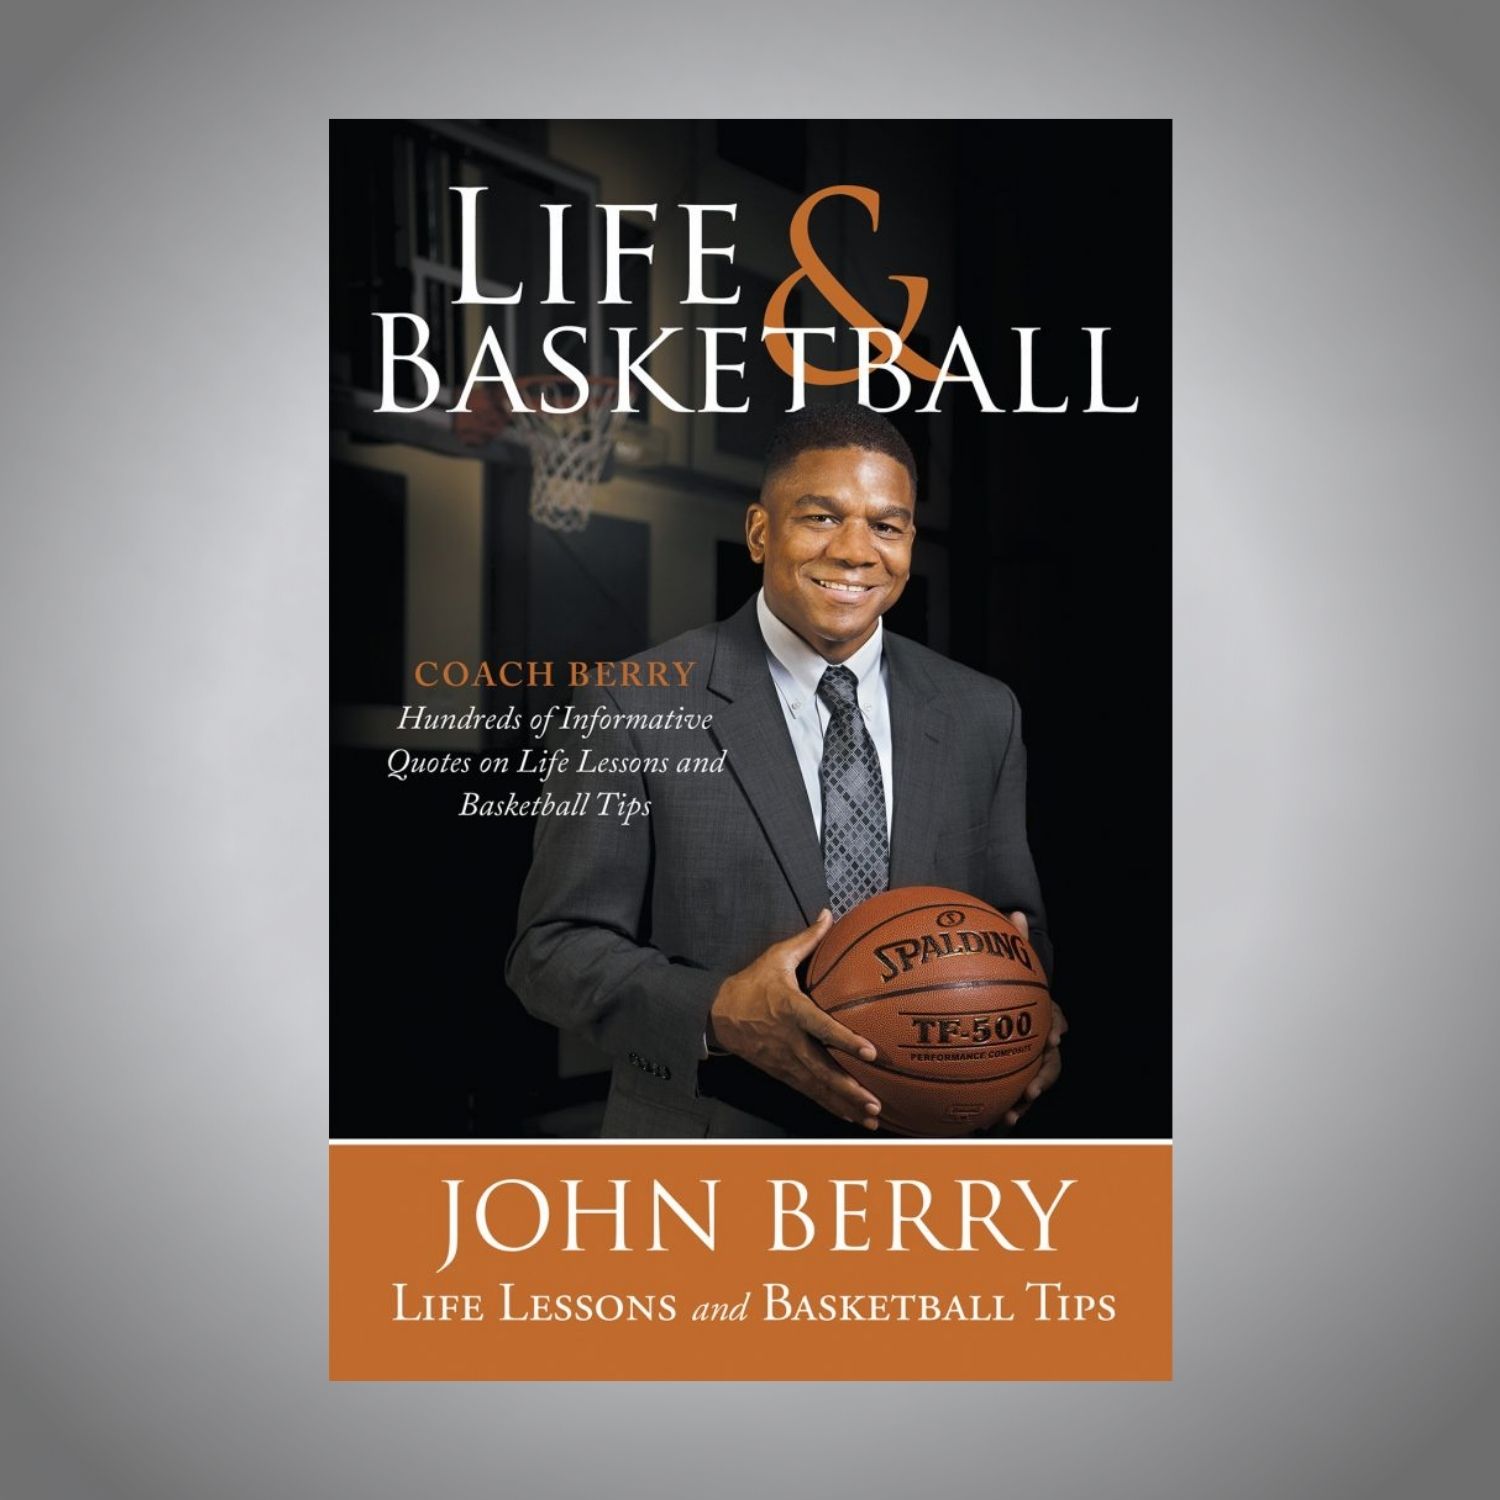 Life and Basketball Book (Signed Copy)